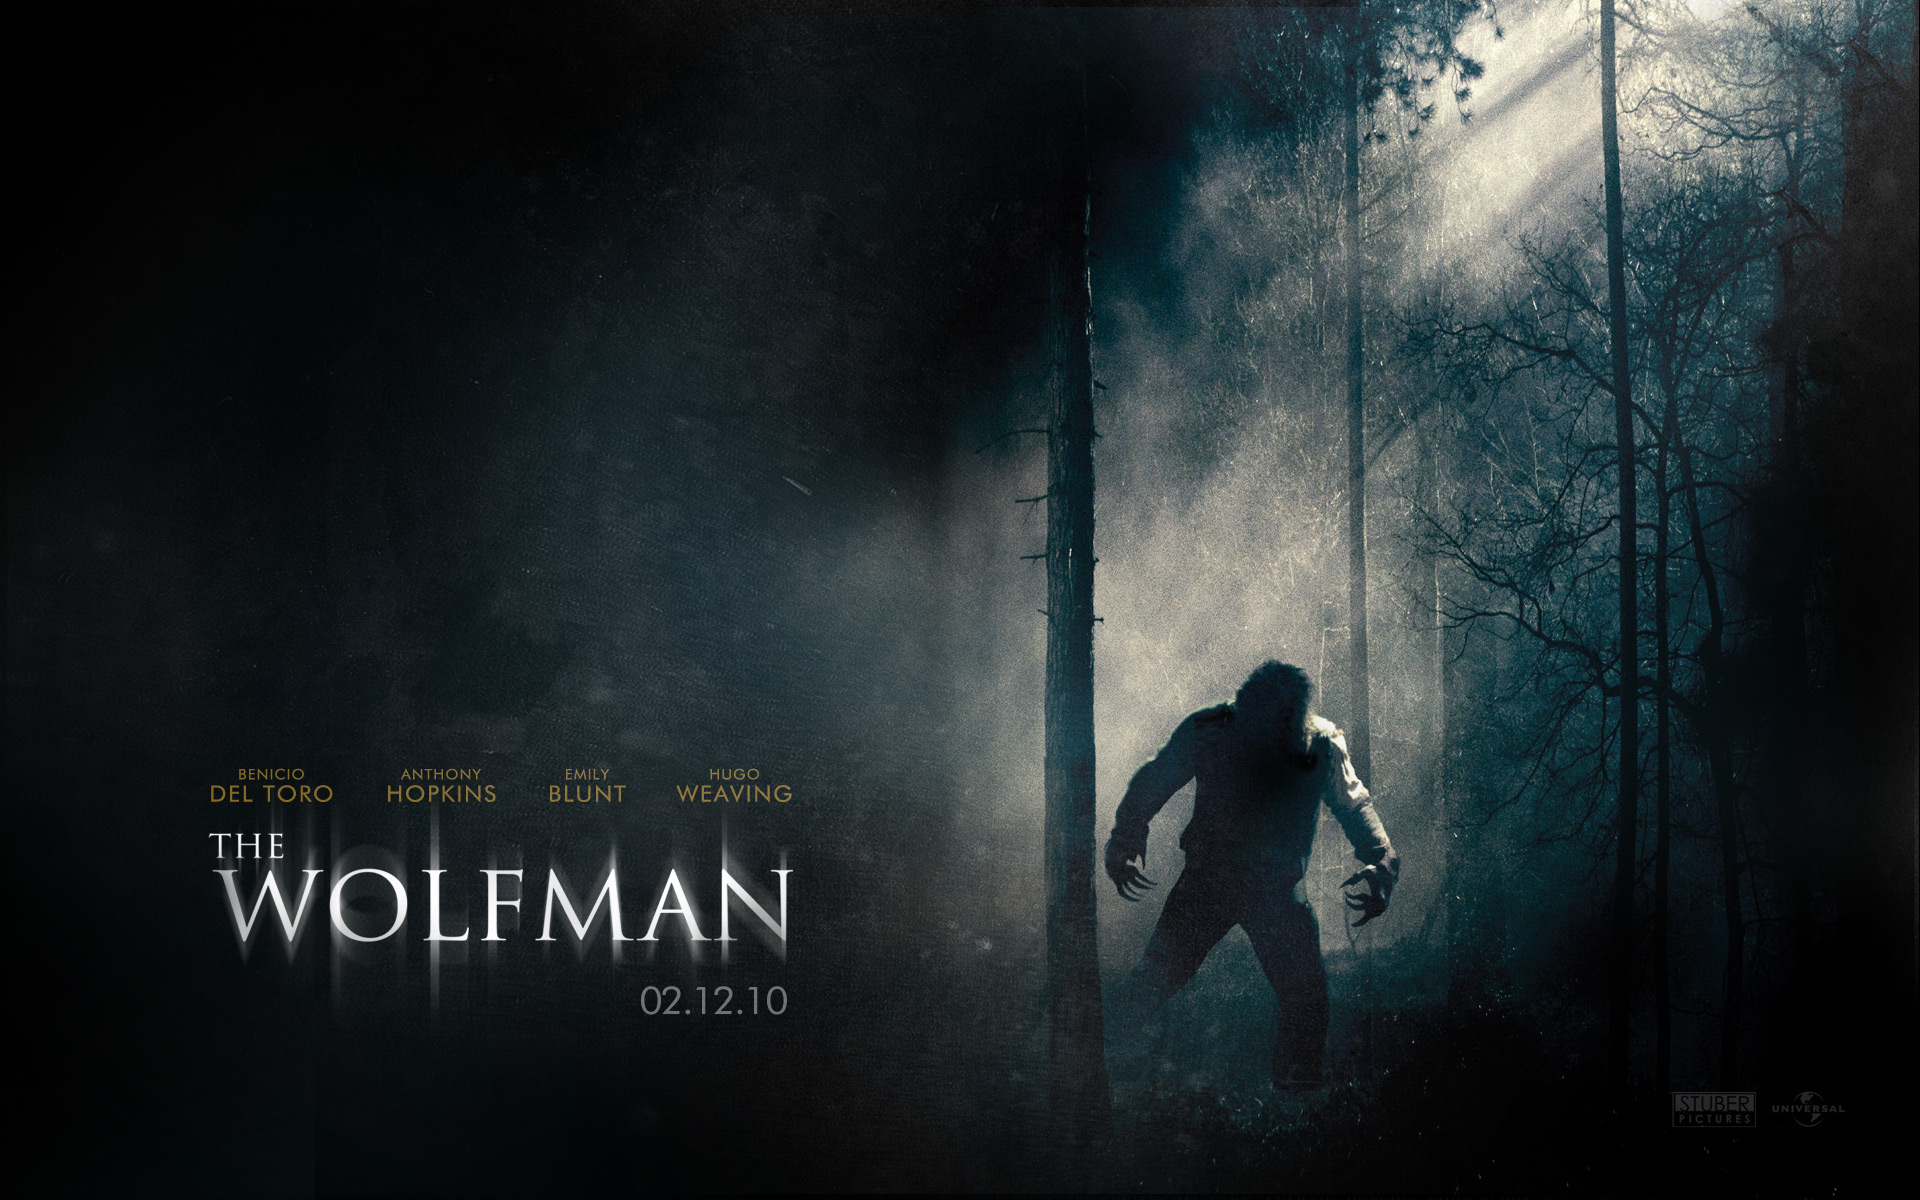 The Wolfman Desktop Wallpaper For HD Widescreen And Mobile